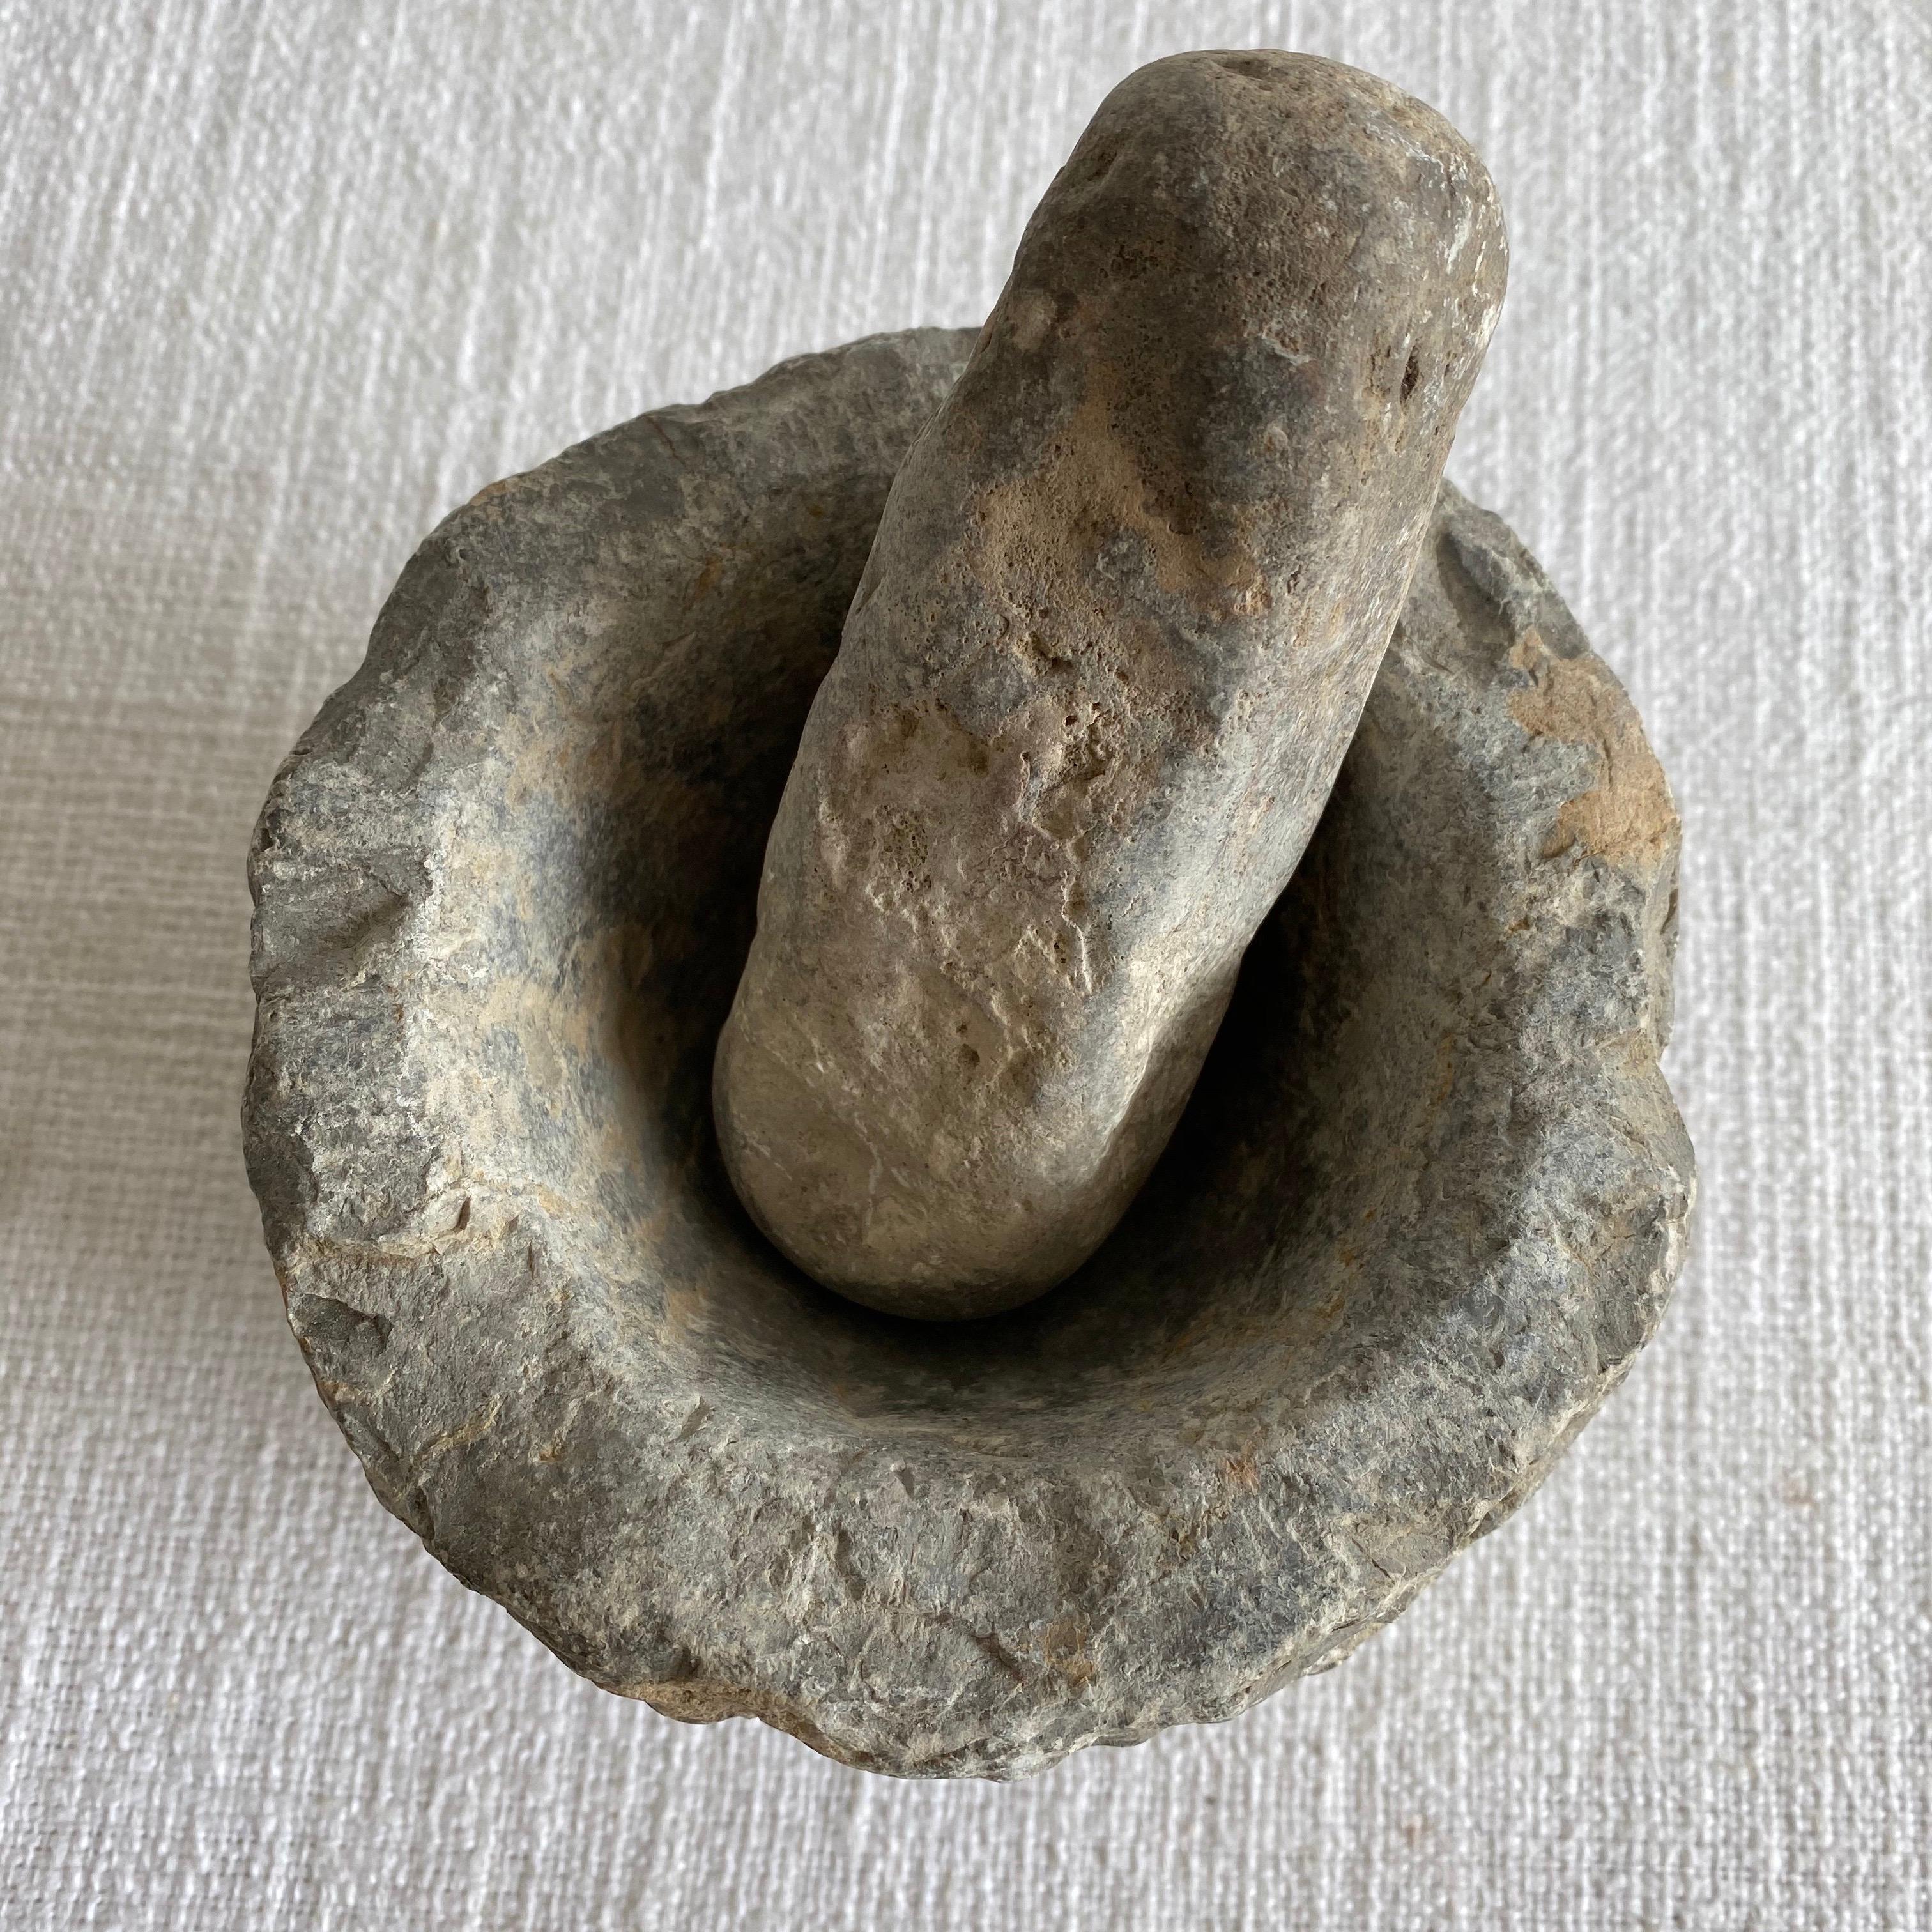 Antique stone mortar and pestle set, solid heavy stone, use as decoration, or for everyday use.
Size: 6” D x 5”
Weight: 10lbs.